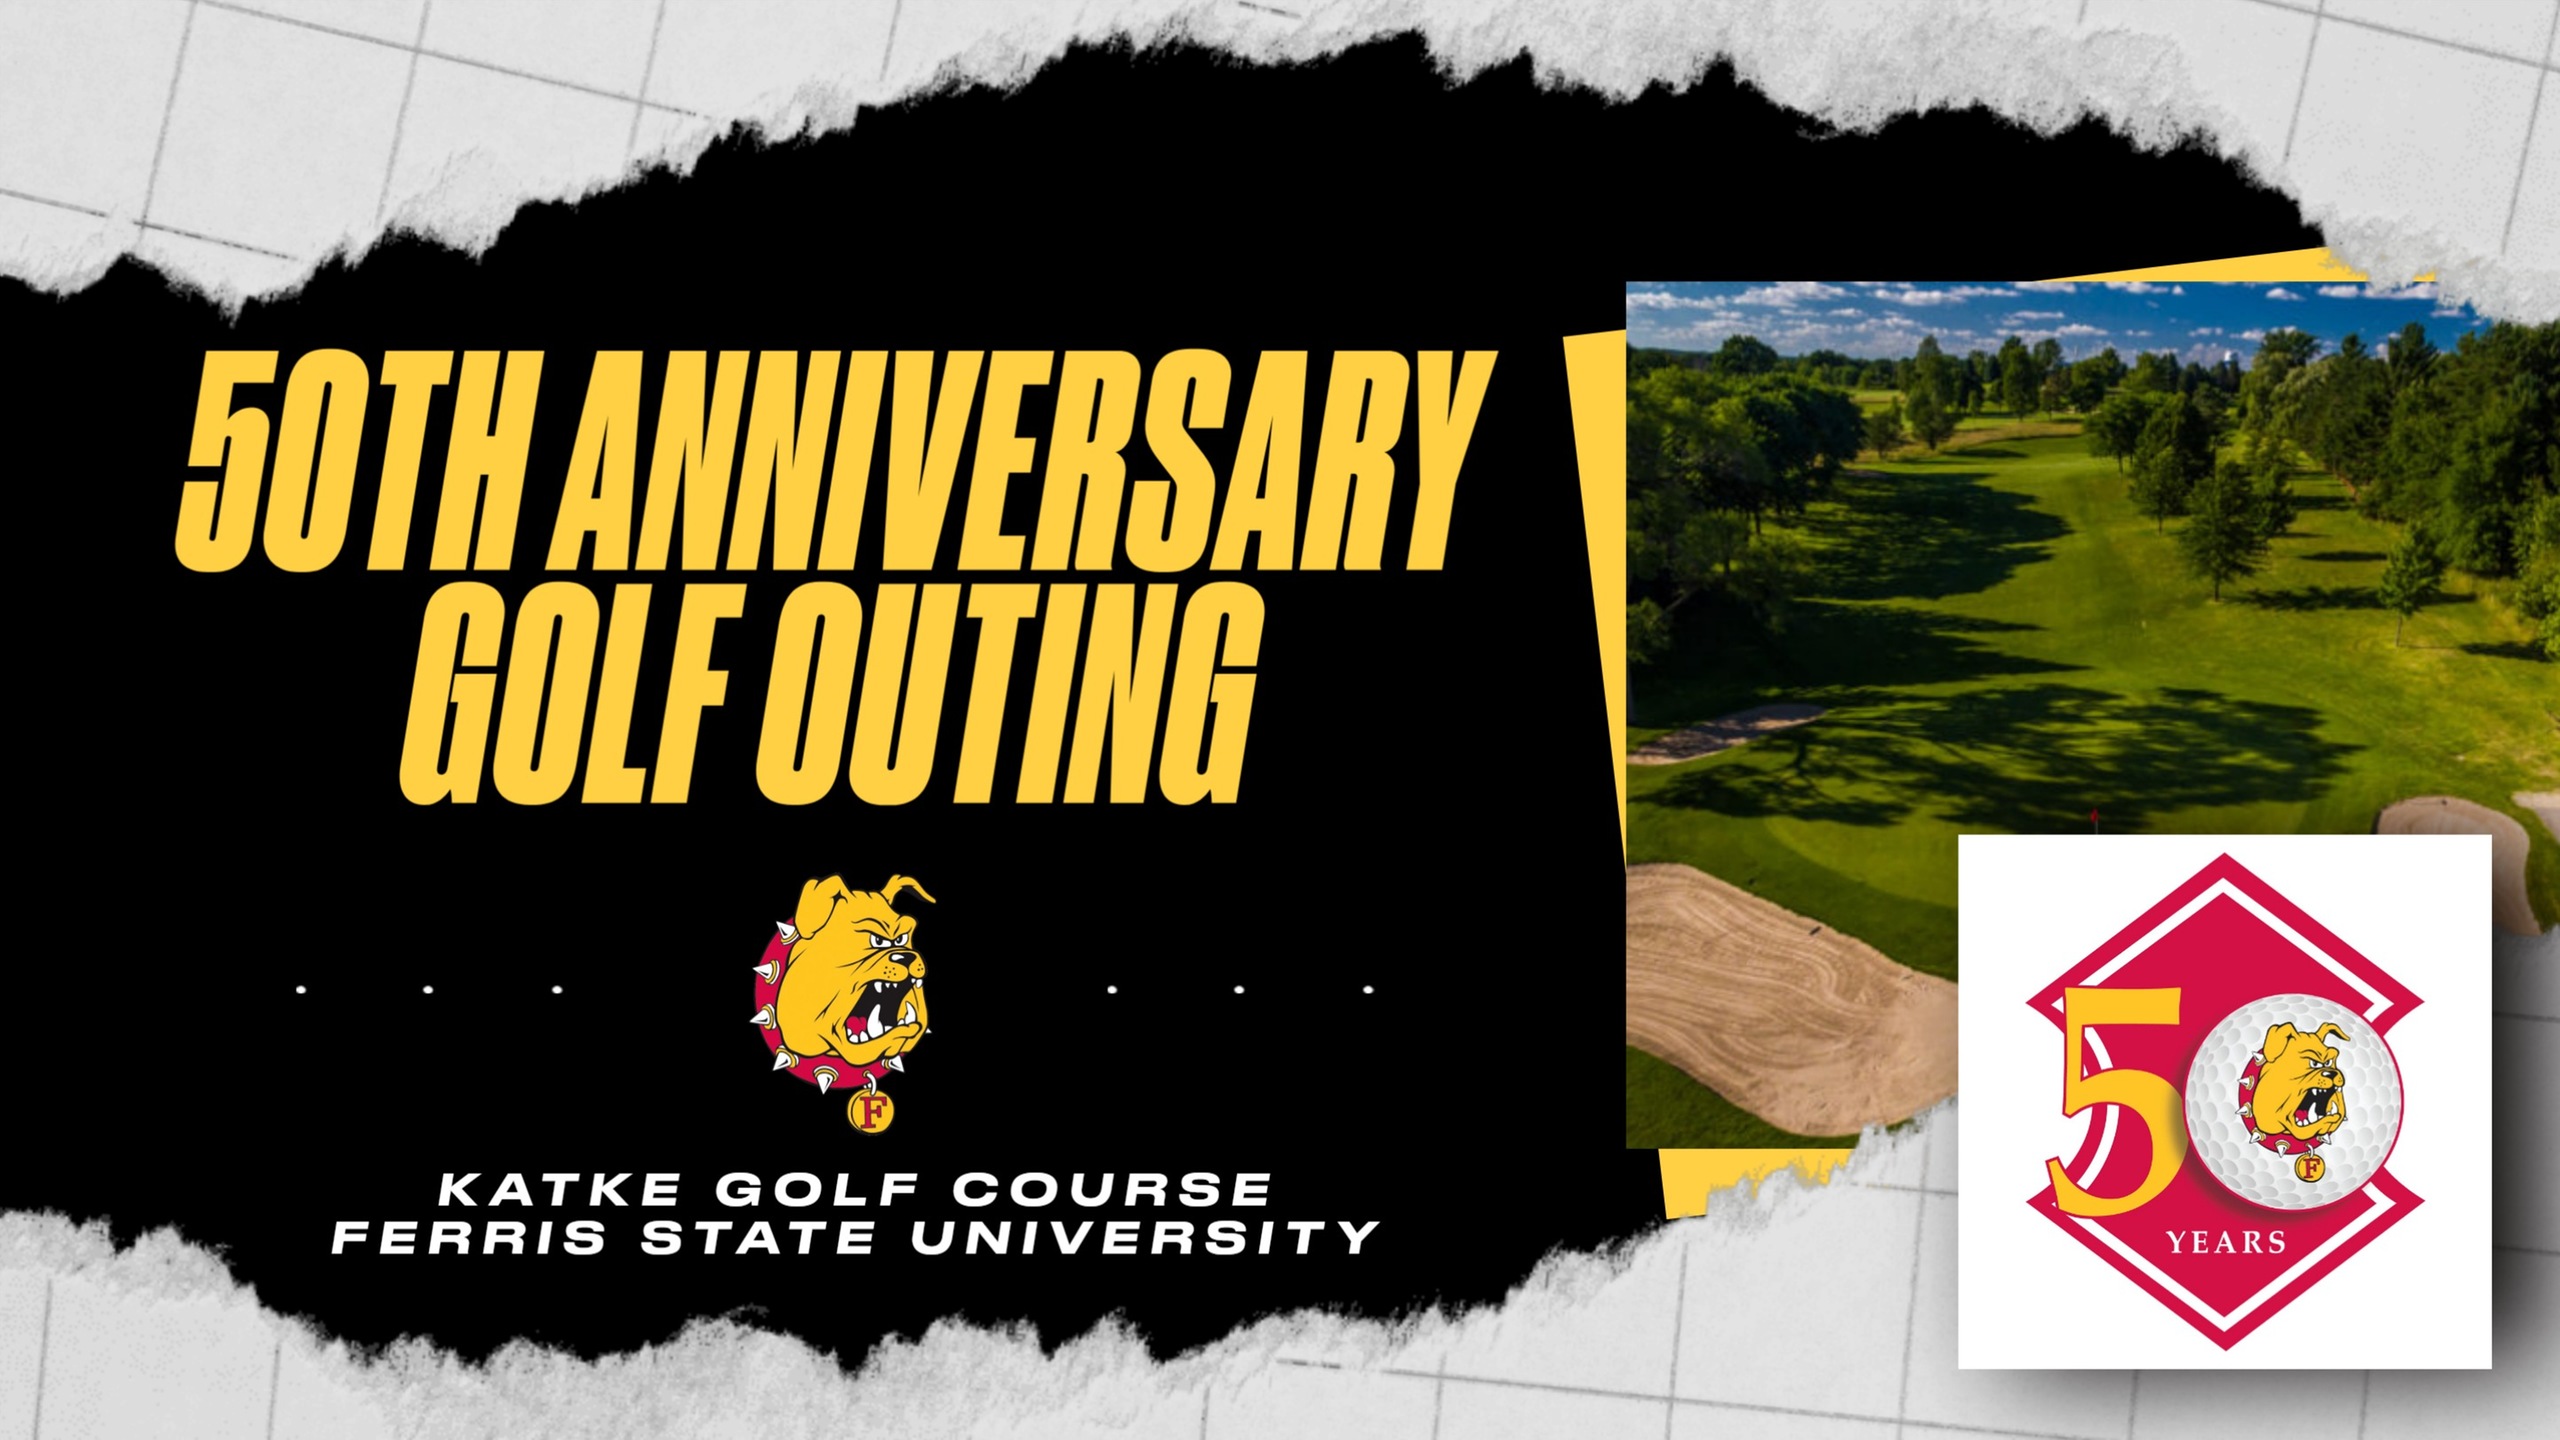 Katke Golf Course To Hold Special 50th Anniversary Golf Classic On Aug. 9